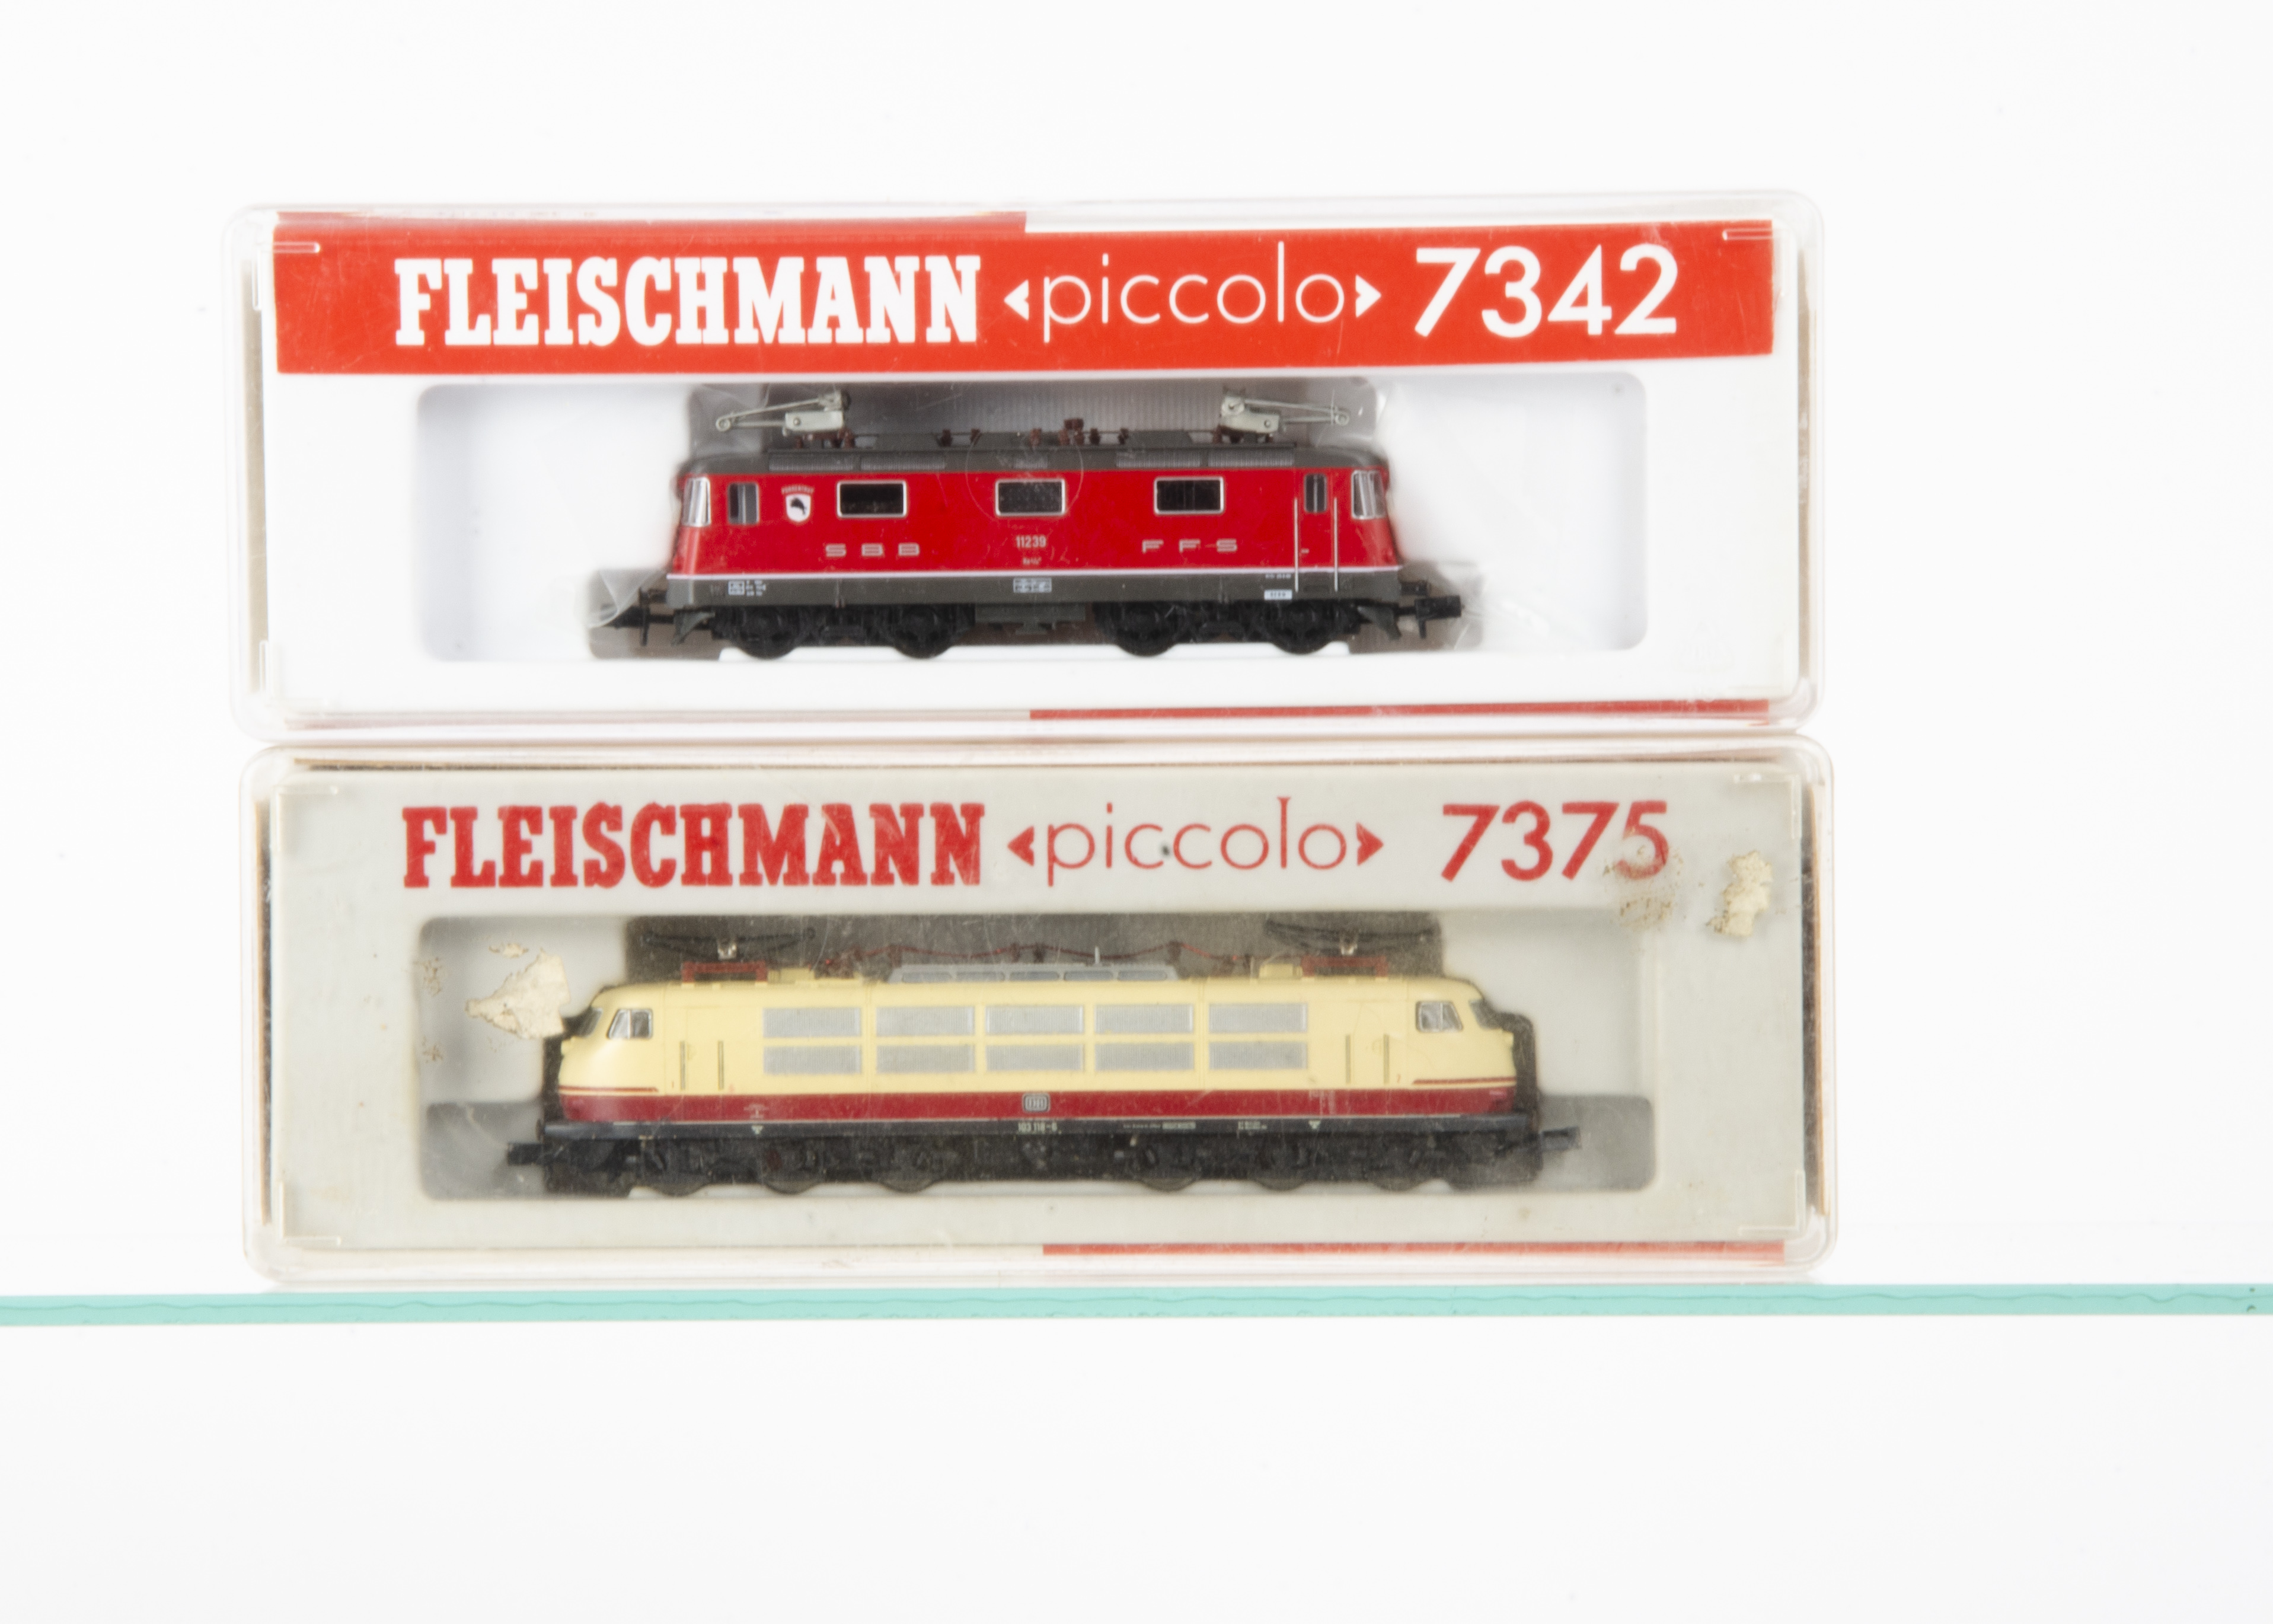 Fleischmann Piccolo N Gauge Electric Locomotives, two cased examples 7342 Re 4/4 11239 in red livery